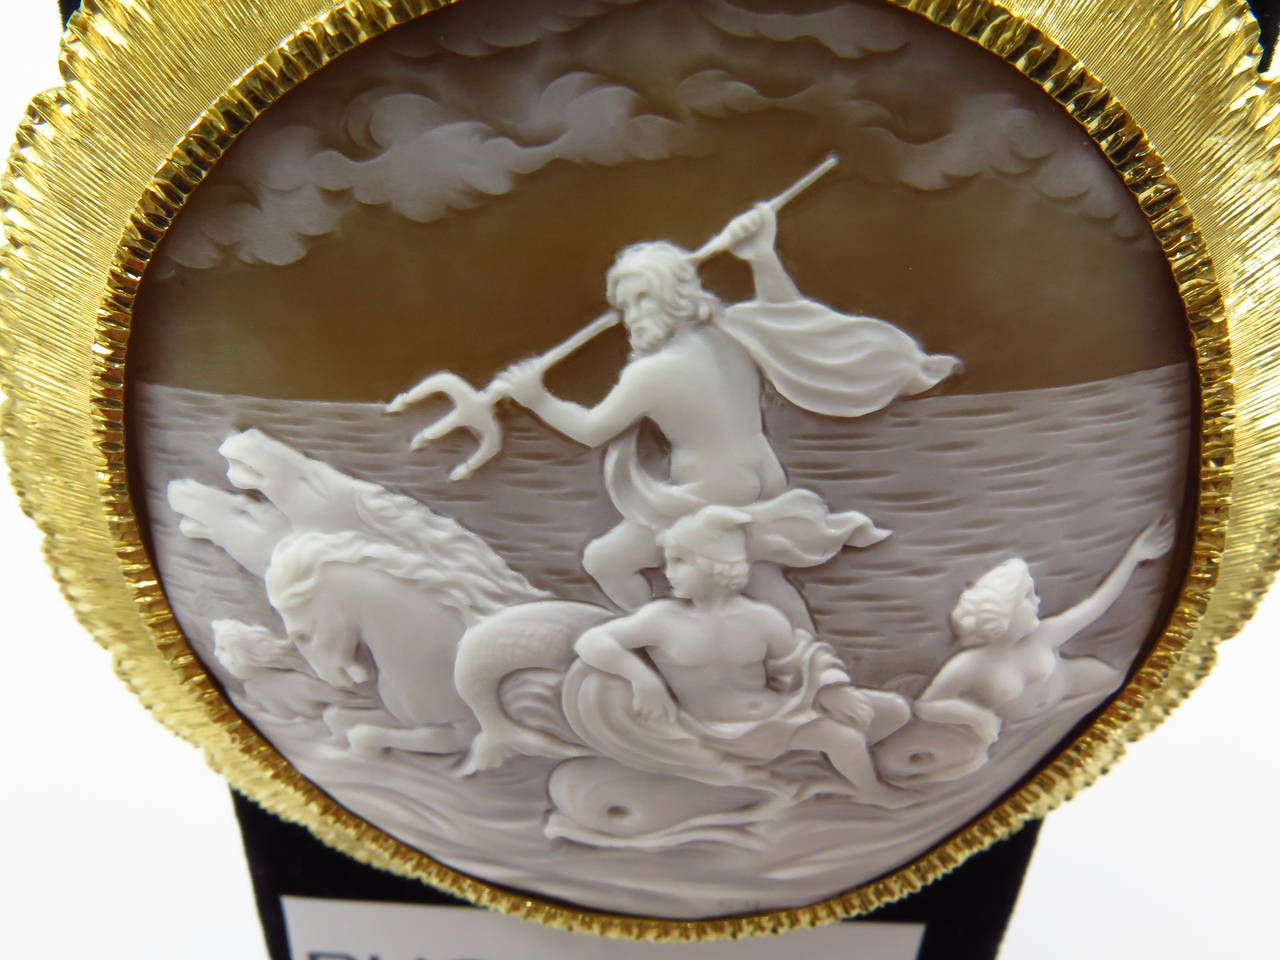 Even if this wasn't signed Buccellati, it would still be the largest most detailed well carved shell cameo I've ever seen. It is 3 inches round depicting Neptune with horses and nymphs swimming and riding dolphins under clouds. There is a hairline